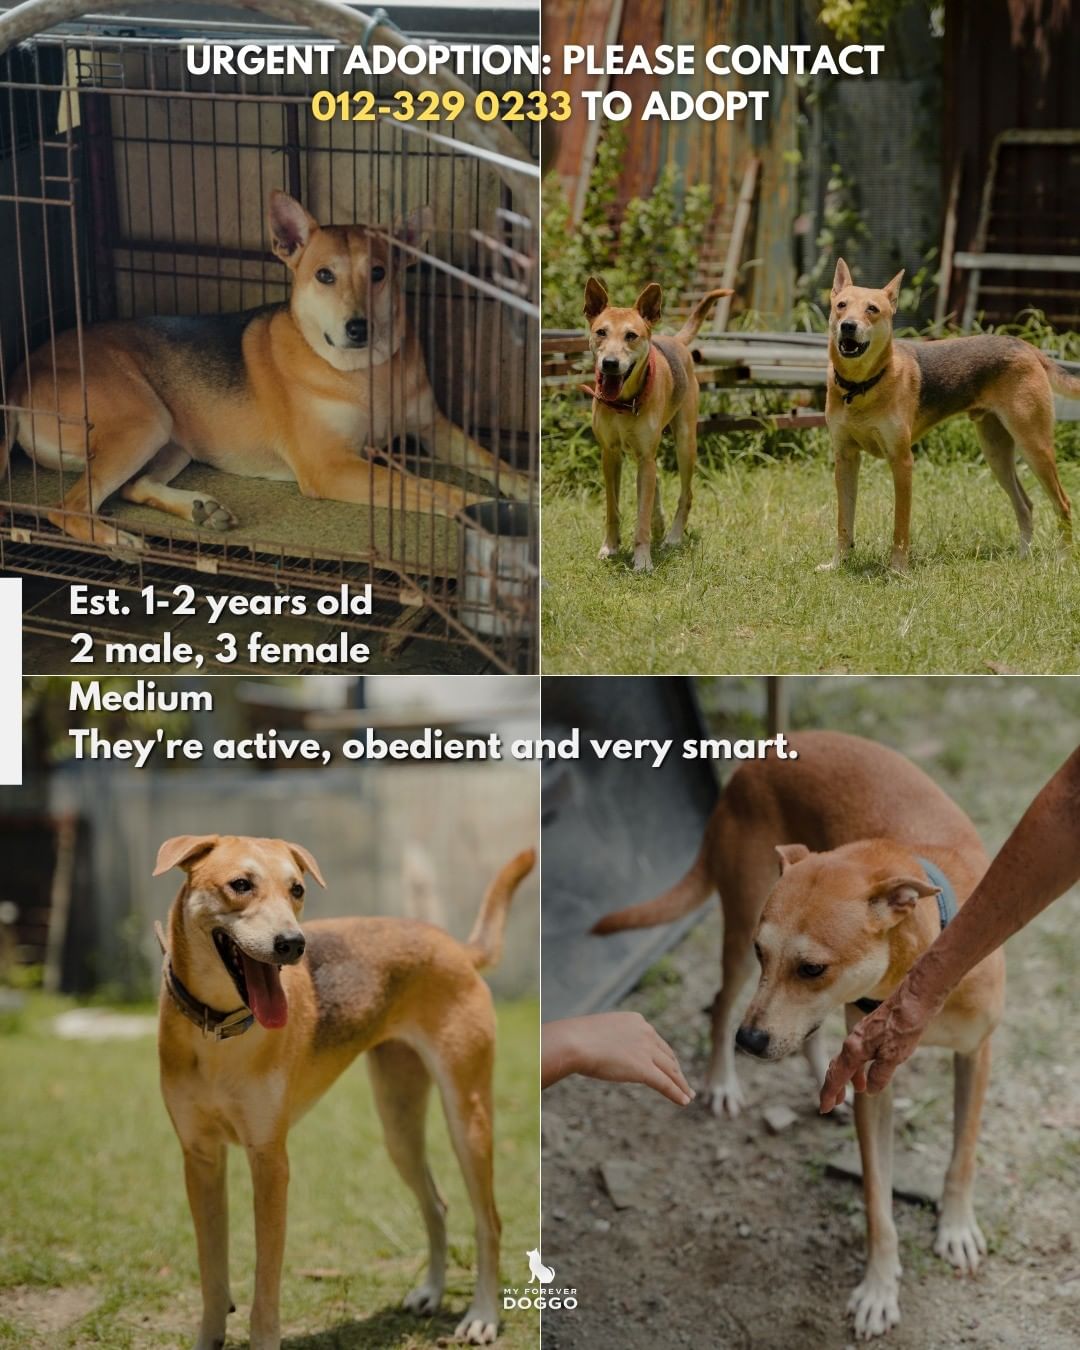 Aunty Angie is putting 14 of the stray dogs that were previously under her care up for adoption after she was told to vacate her shelter premises recently. Source: @myforeverdoggo